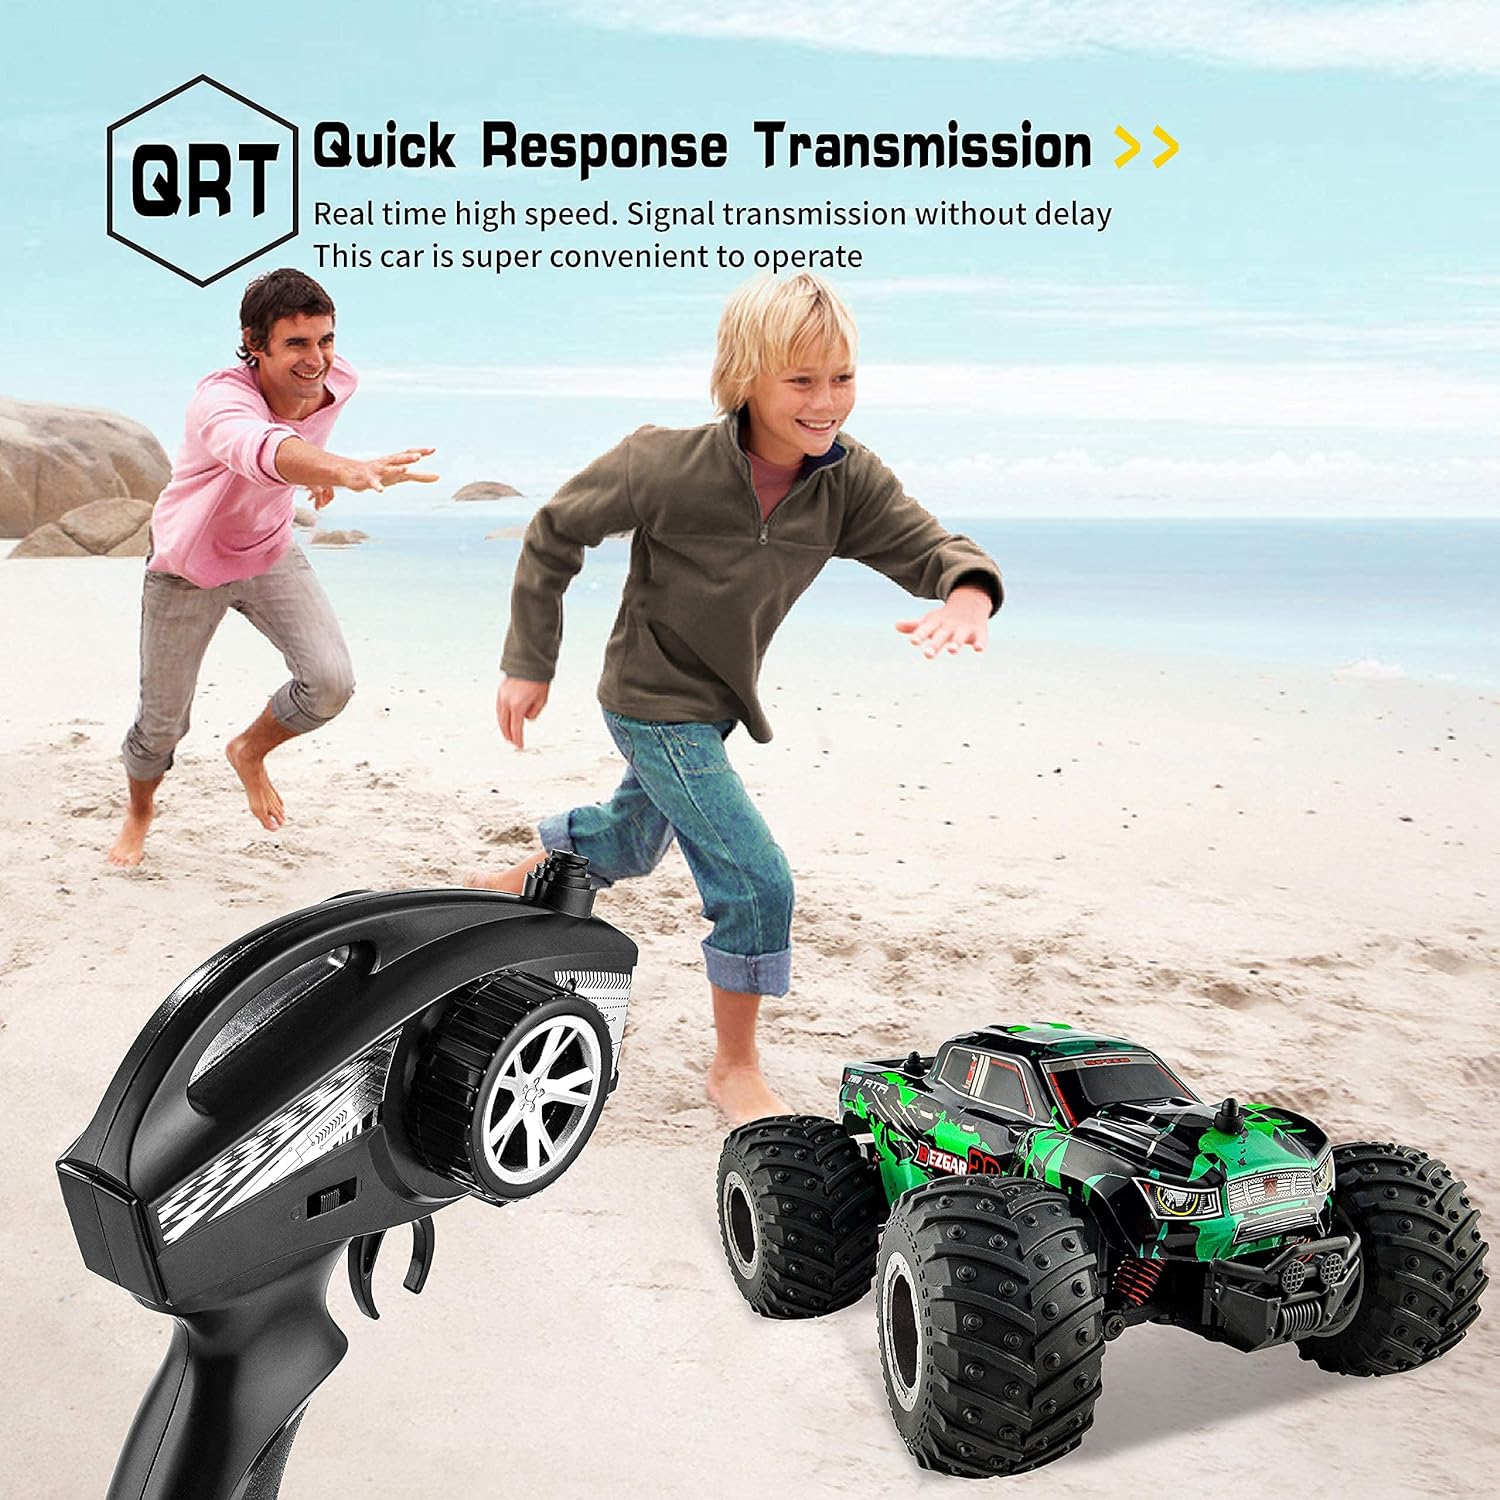 BEZGAR TM201 RC Cars - 1:20 Scale Remote Control Car,2WD Top Speed 15 Km/h Electric Toy Off Road 2.4GHz RC Car Vehicle Truck Crawler with Two Rechargeable Batteries for Boys Kids and Adults